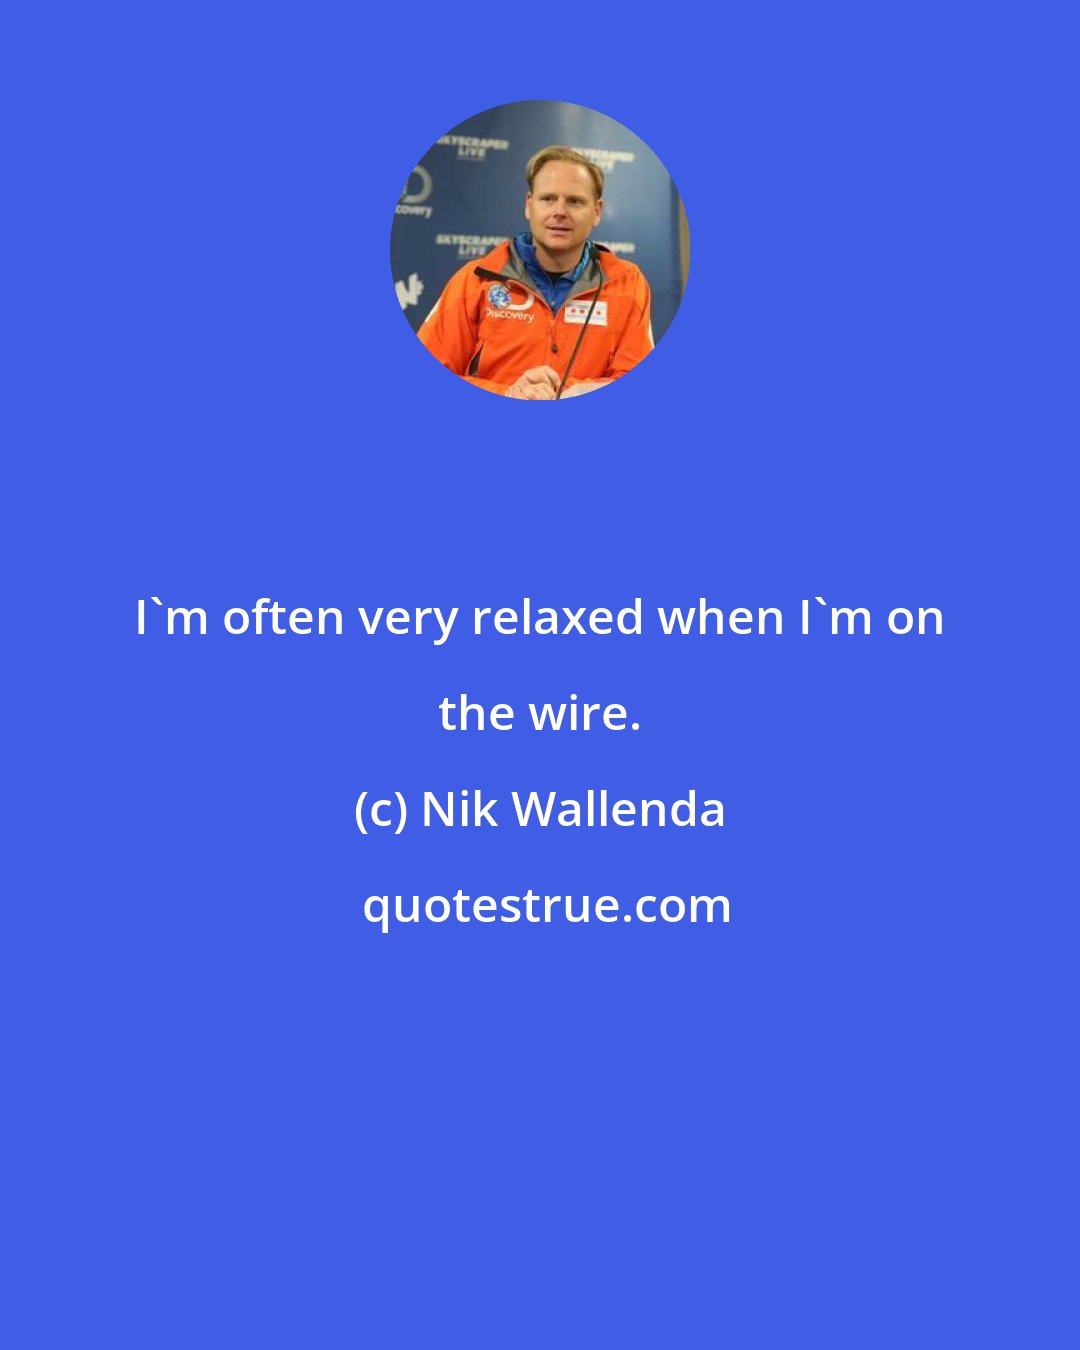 Nik Wallenda: I'm often very relaxed when I'm on the wire.